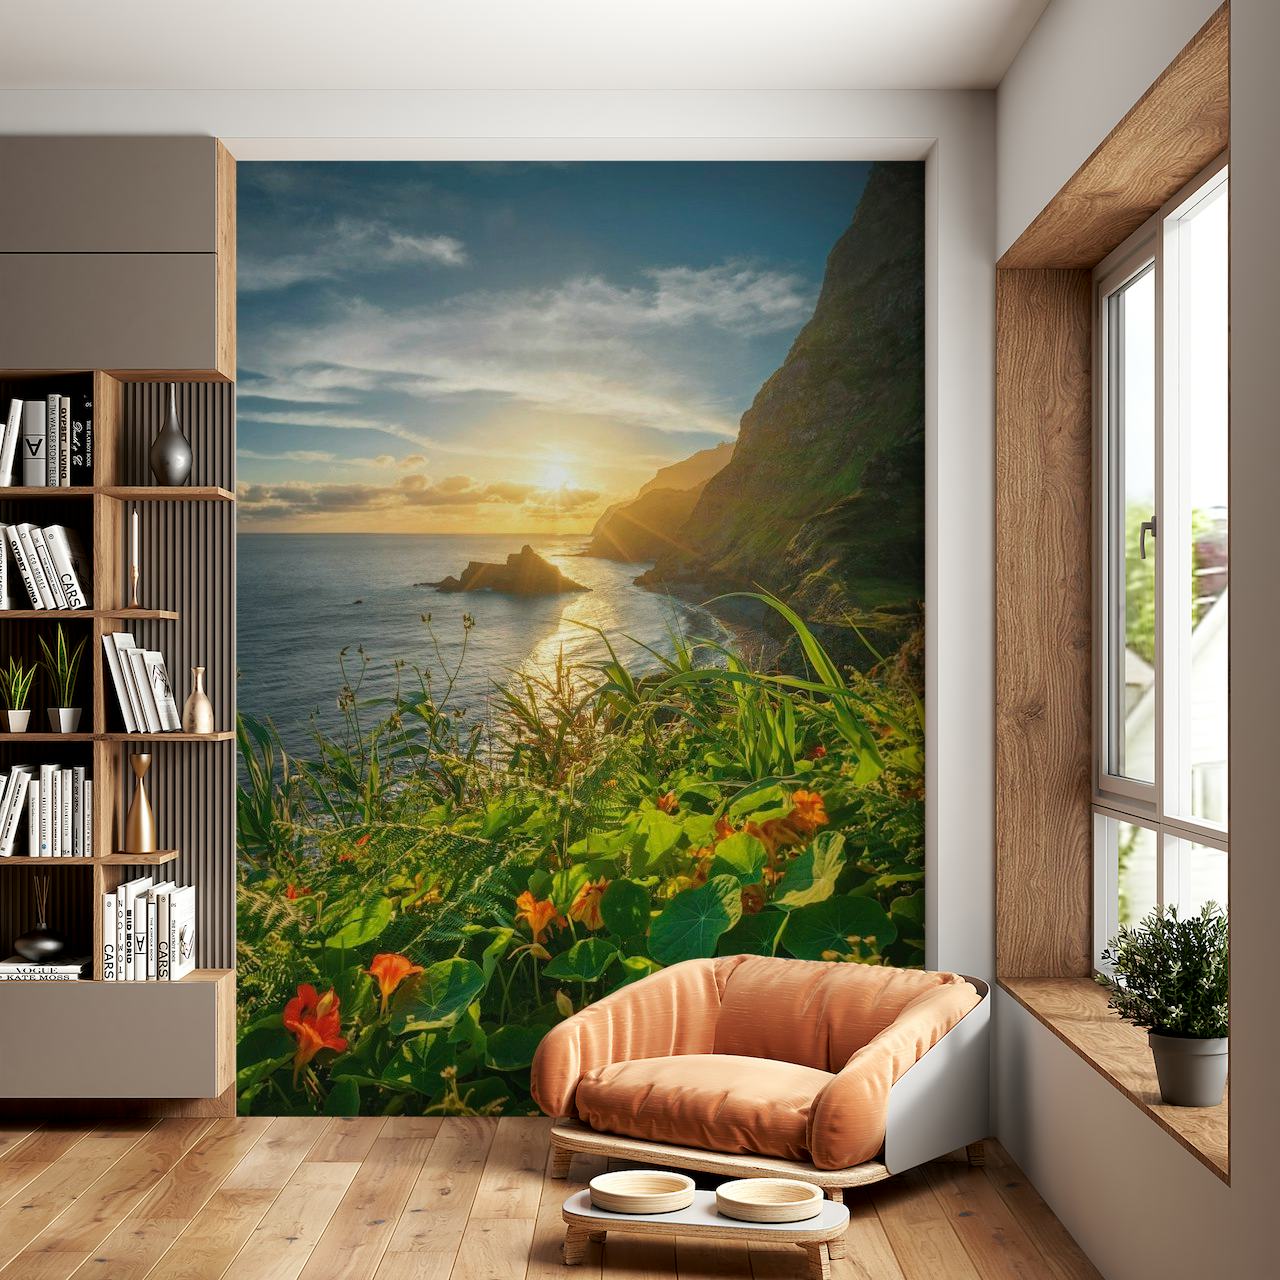 Sunrise over a calm ocean with vibrant tropical flowers and lush greenery on a coastal cliff wall mural